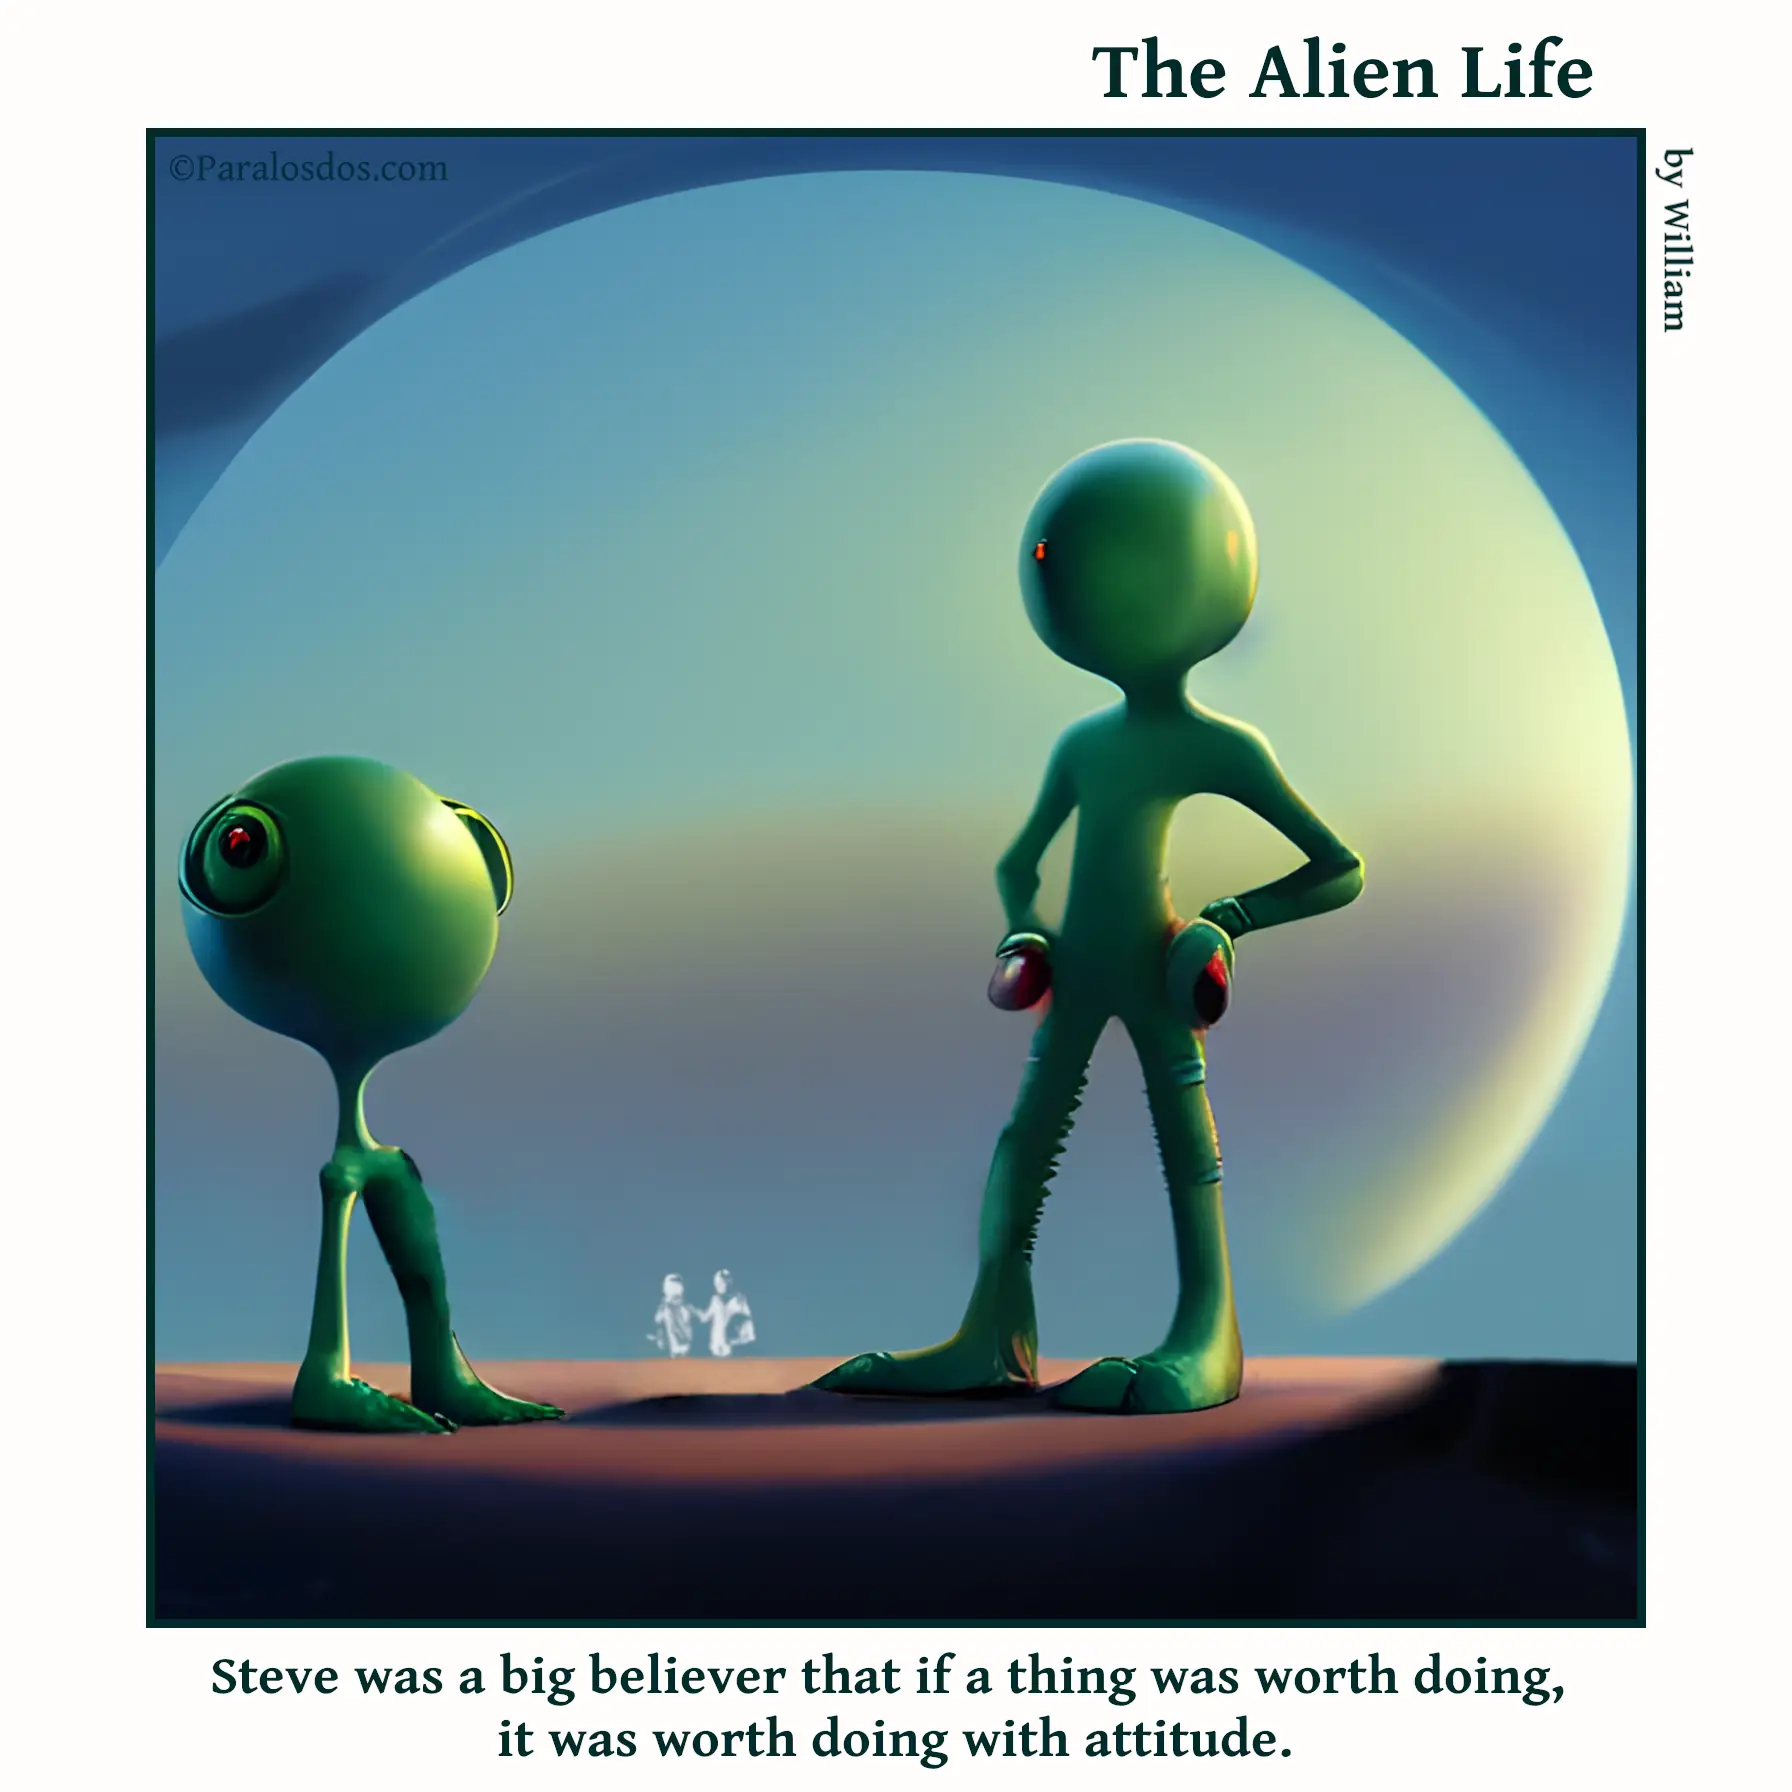 The Alien Life, one panel Comic. An alien is striking a very confident, attitude filled pose. The caption reads: Steve was a big believer that if a thing was worth doing, it was worth doing with attitude.